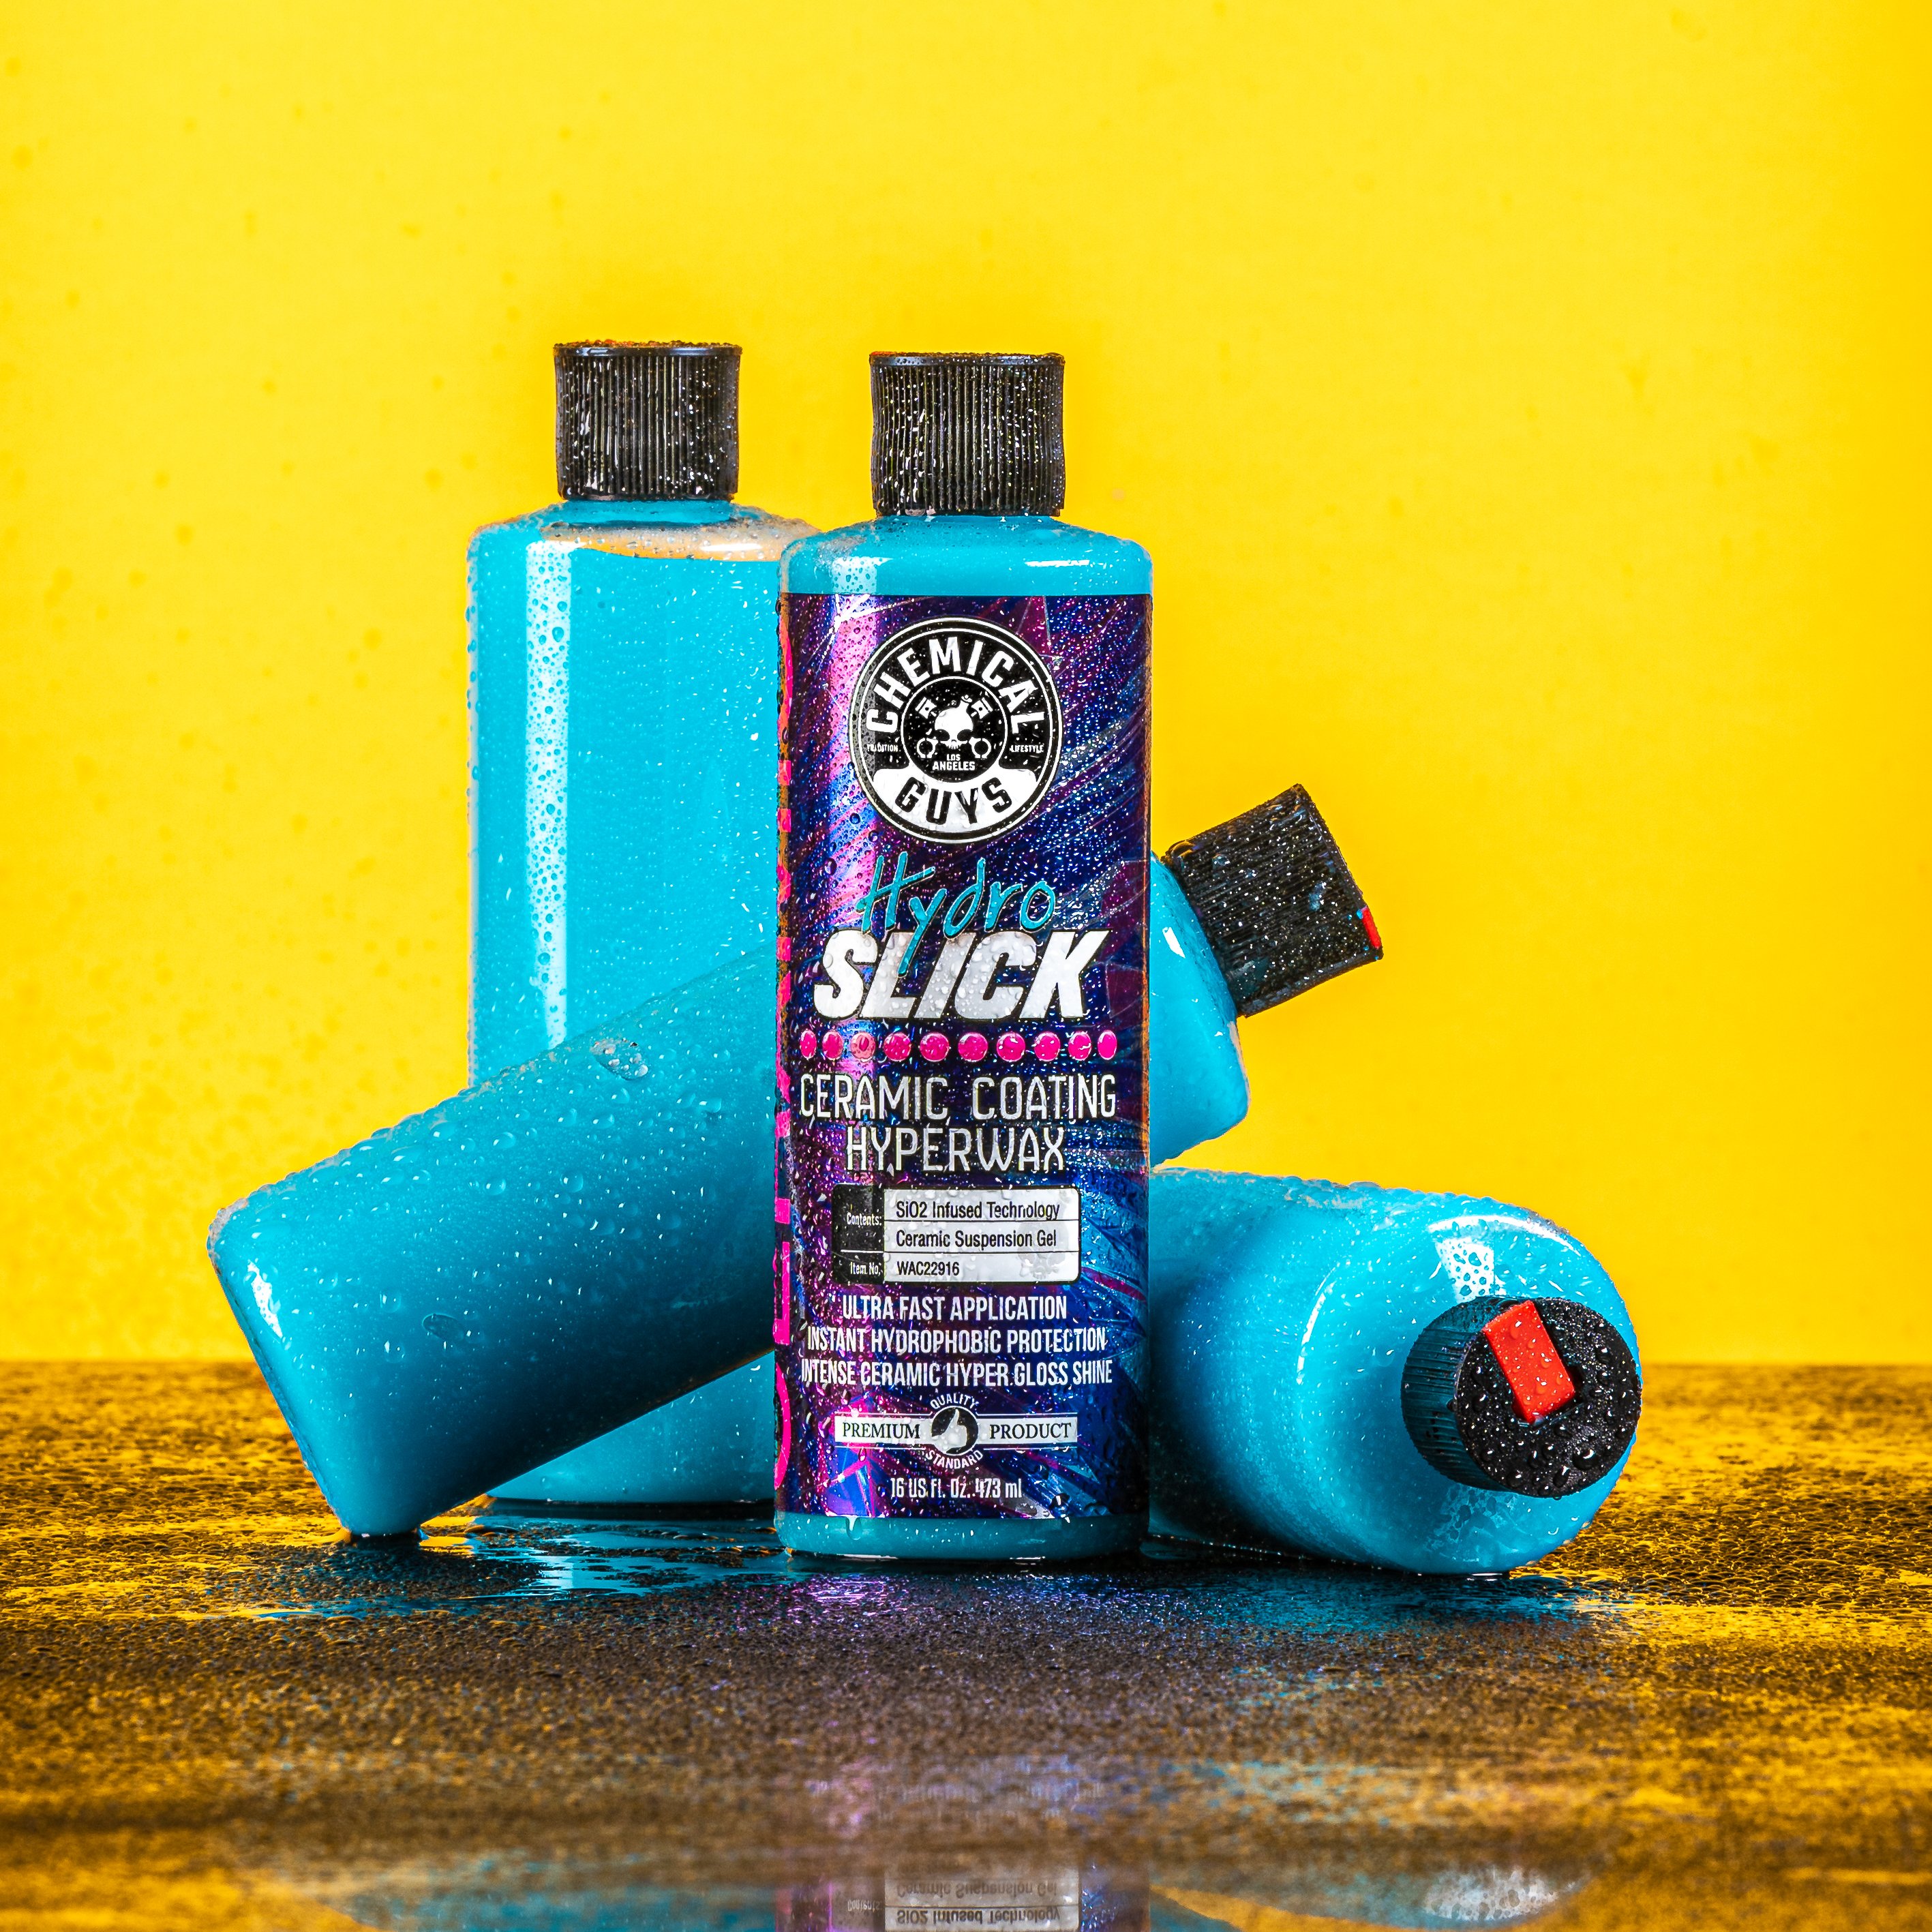 Chemical Guys on X: NEW PRODUCT - Now introducing HydroSlick, the